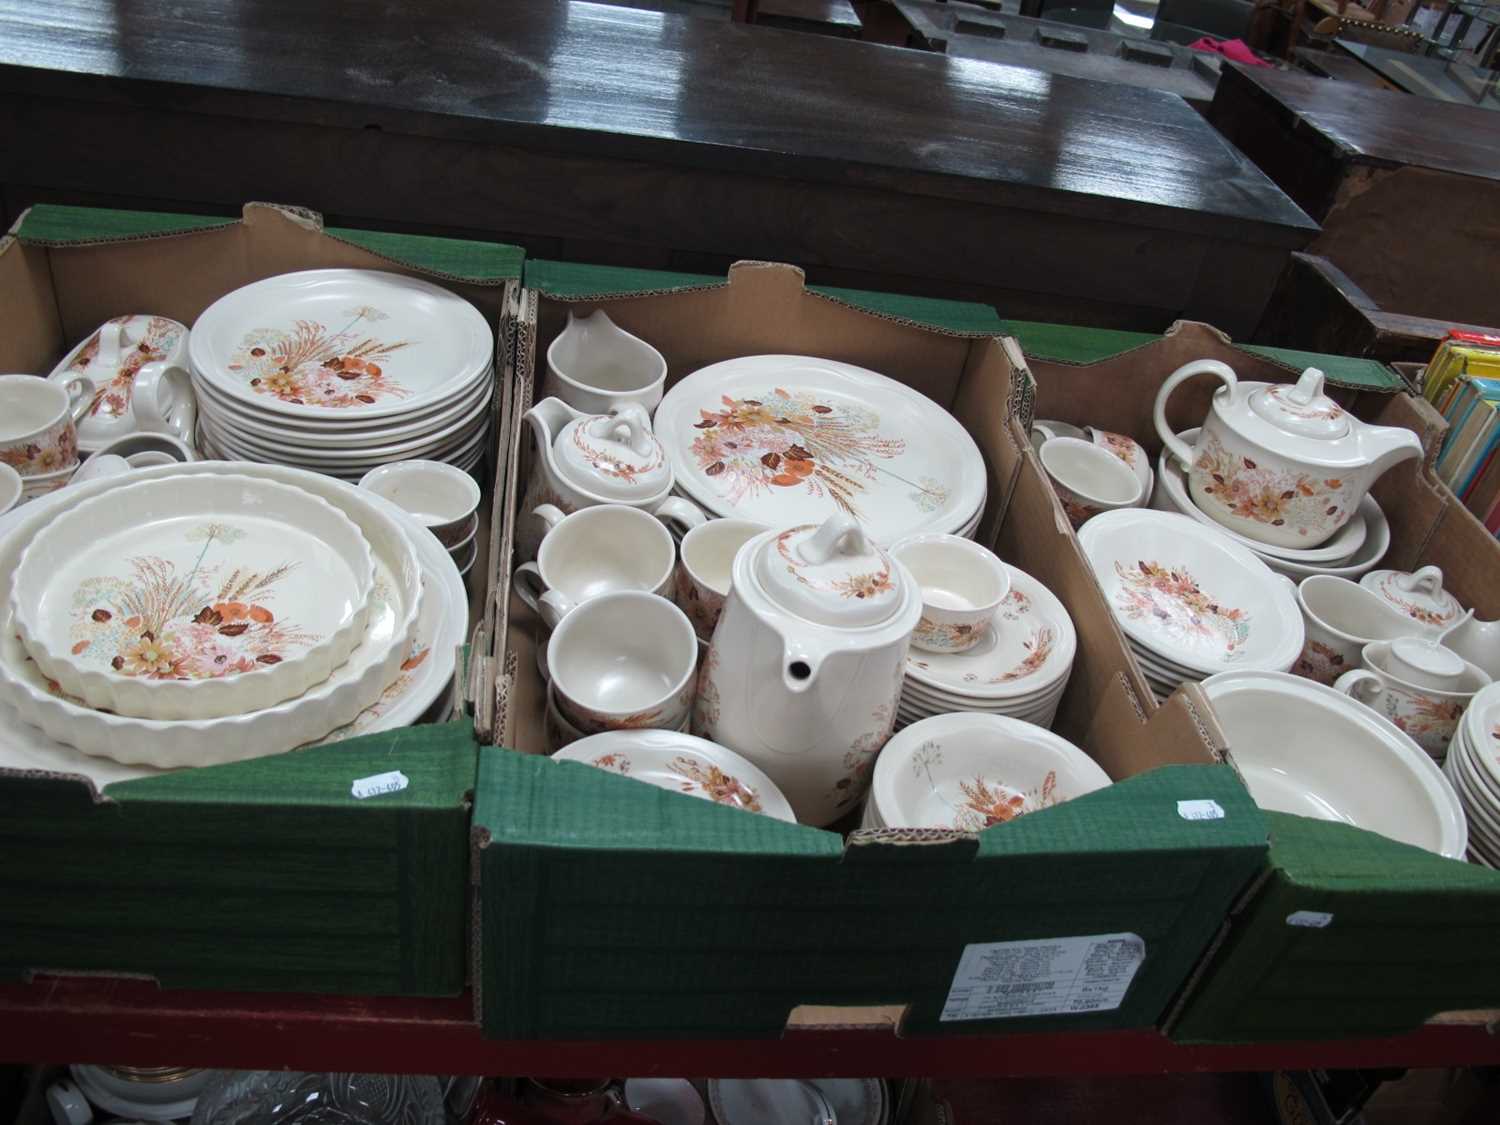 Poole 'Summer Glory' Tea and Dinner Service, comprising of dinner plates, serving dishes, bowls, tea